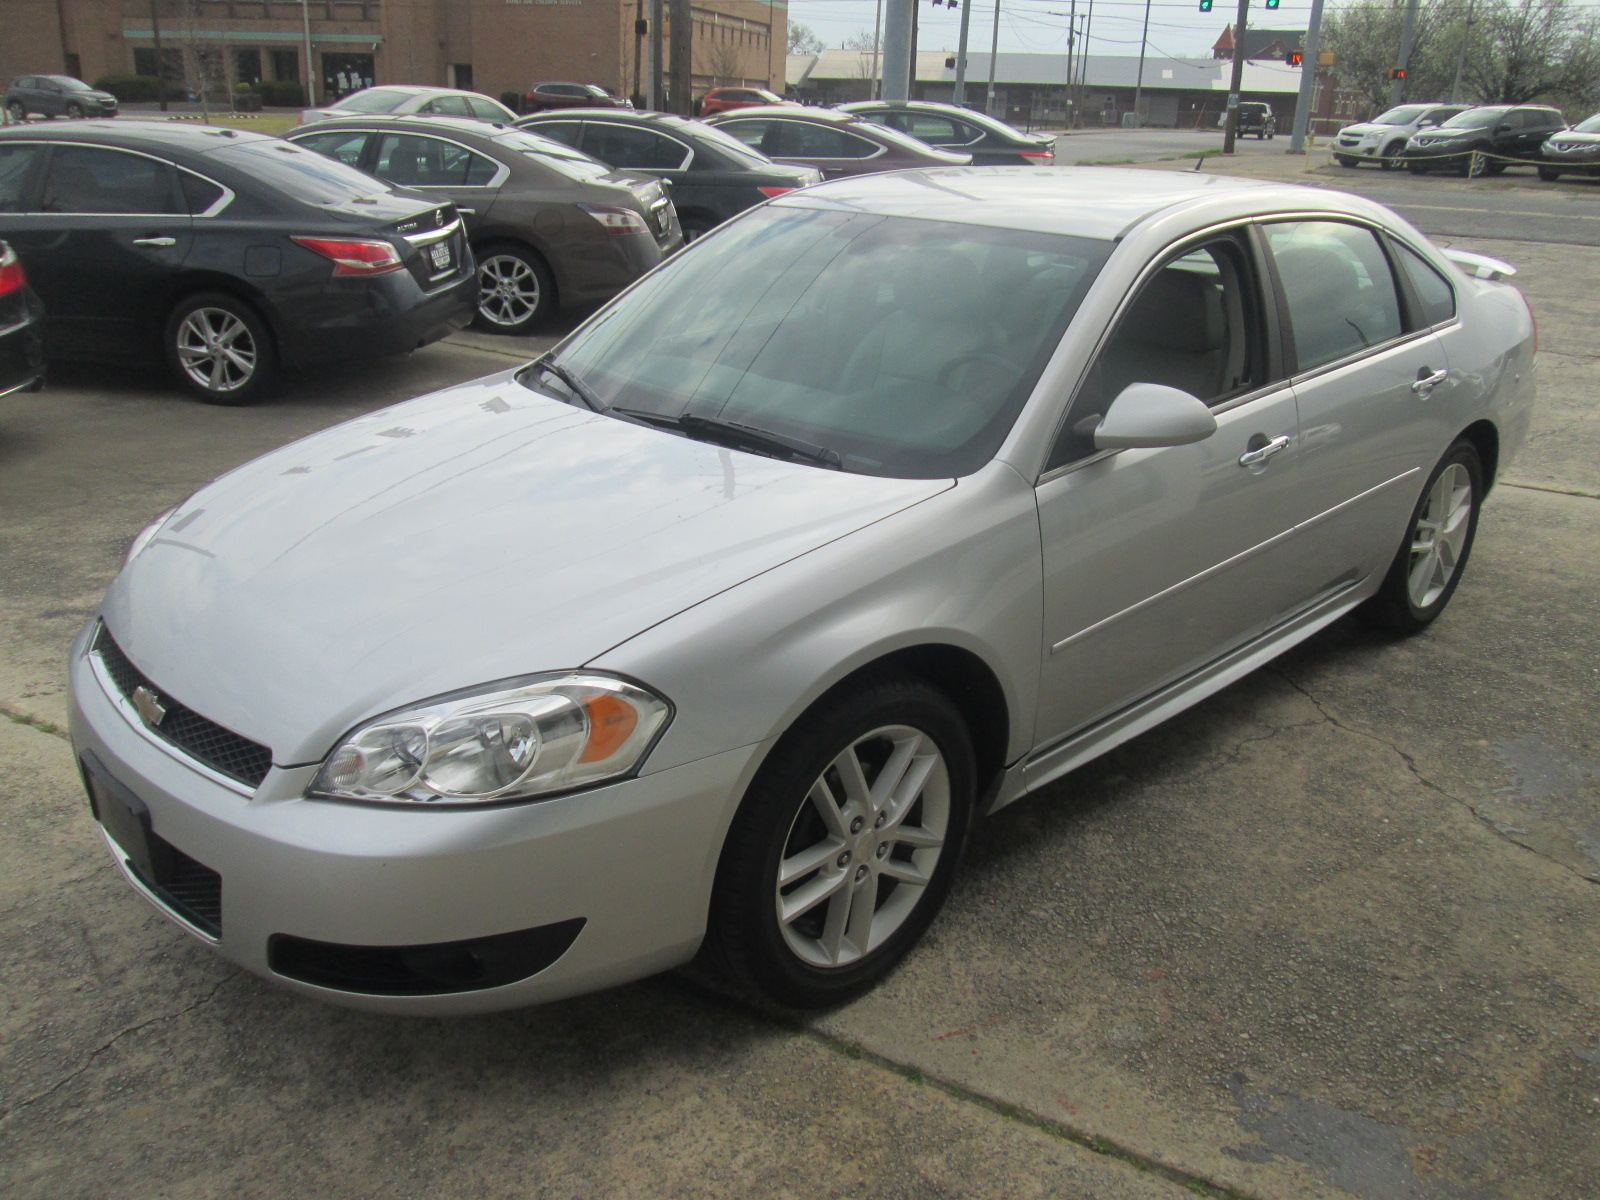 Used Chevrolet Impala Limited LTZ for Sale Right Now - Autotrader